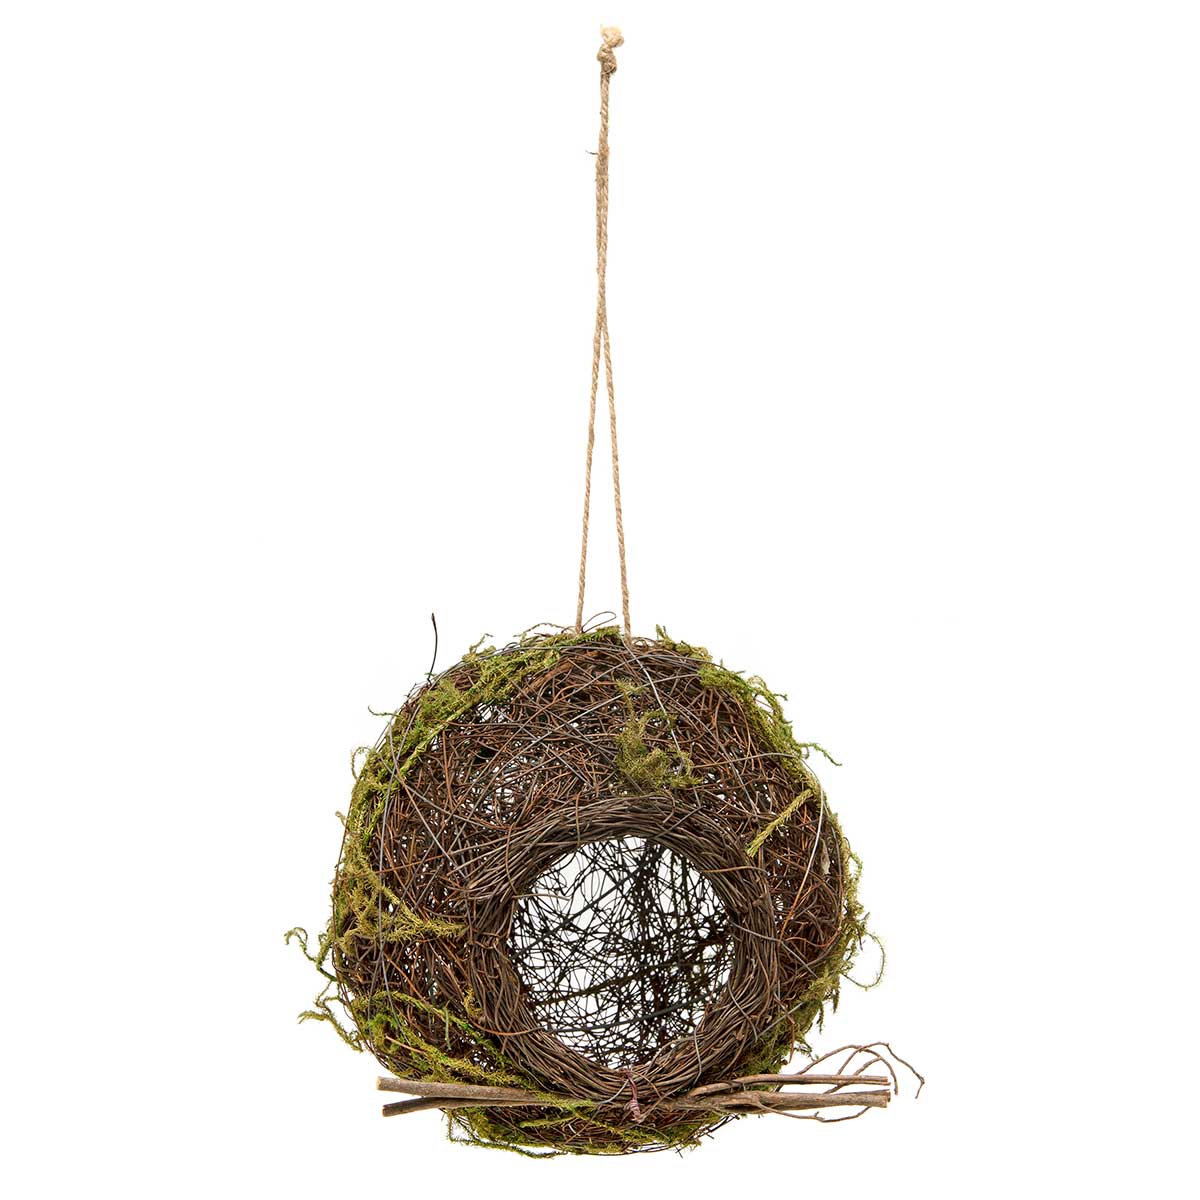 TWIG NEST BALL LARGE 7.5IN X 7IN BROWN/GREEN